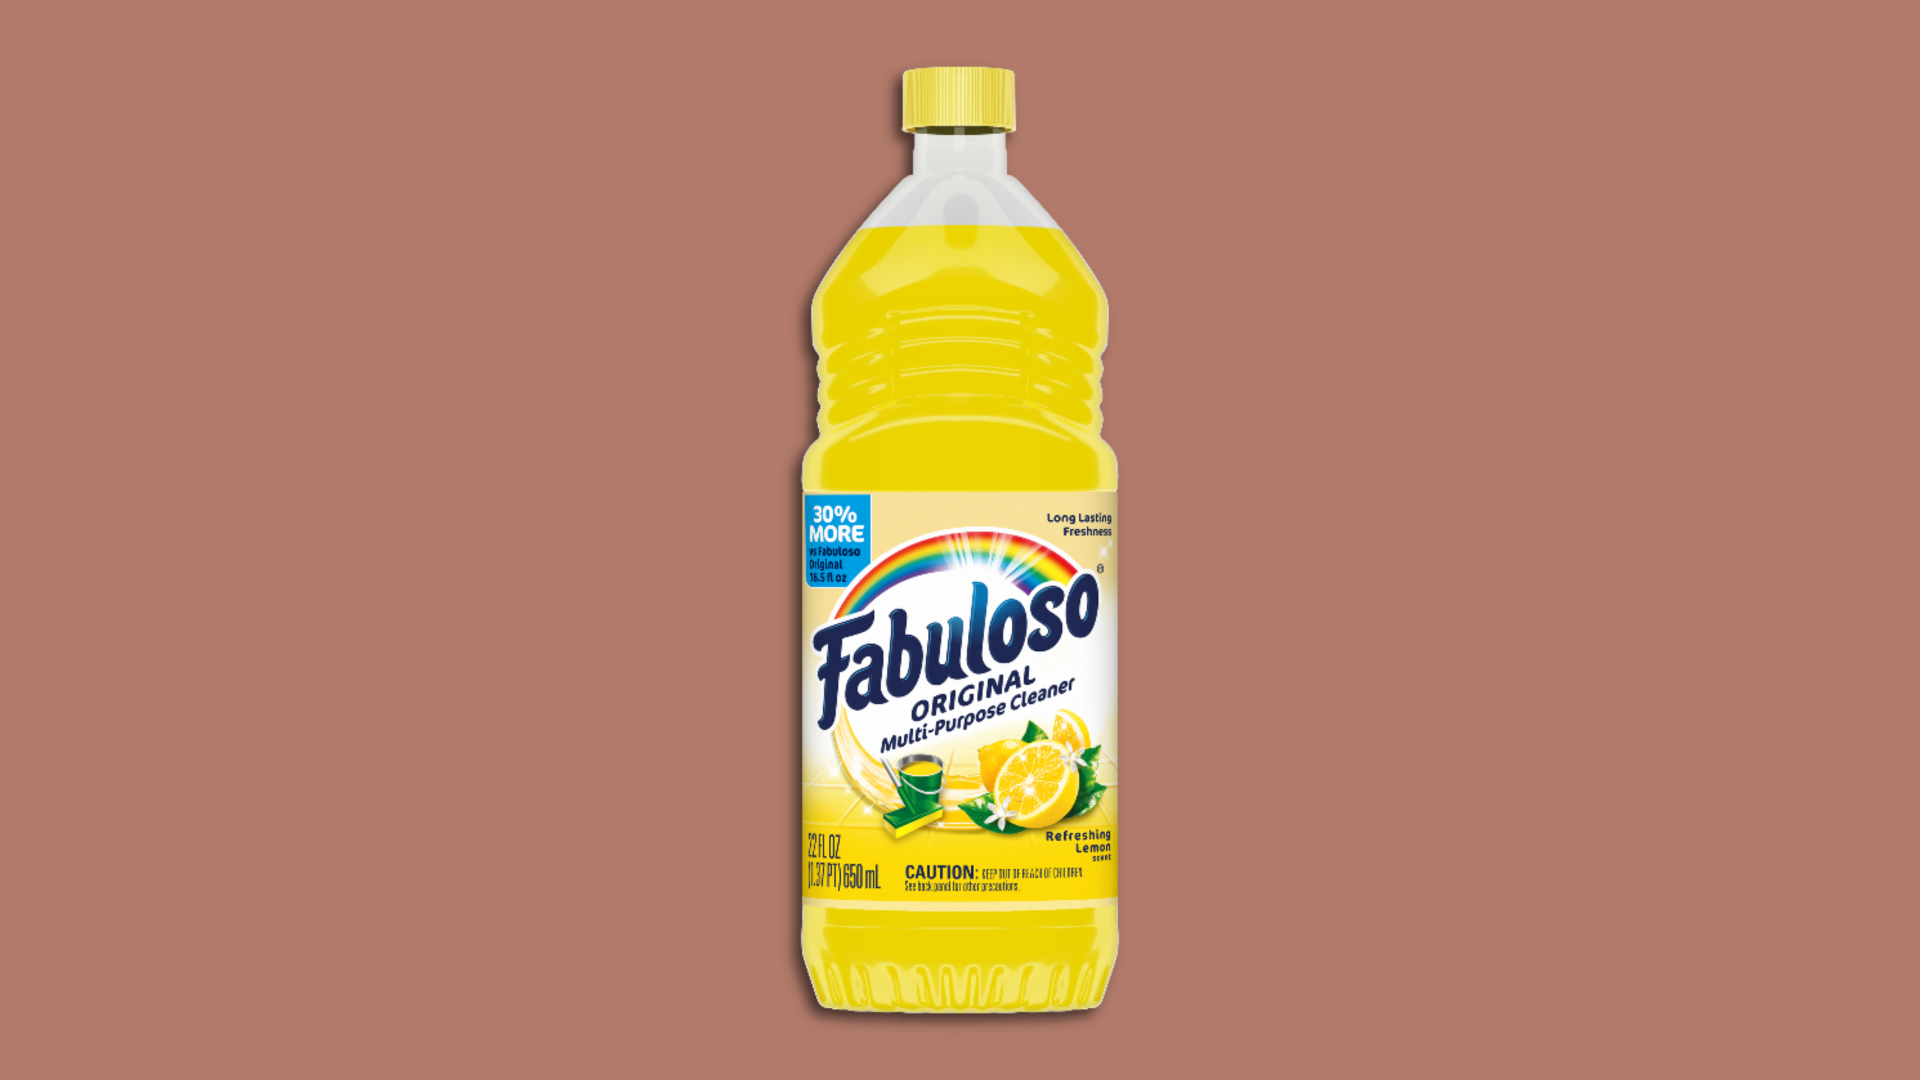 Bottle of Fabuloso cleaner